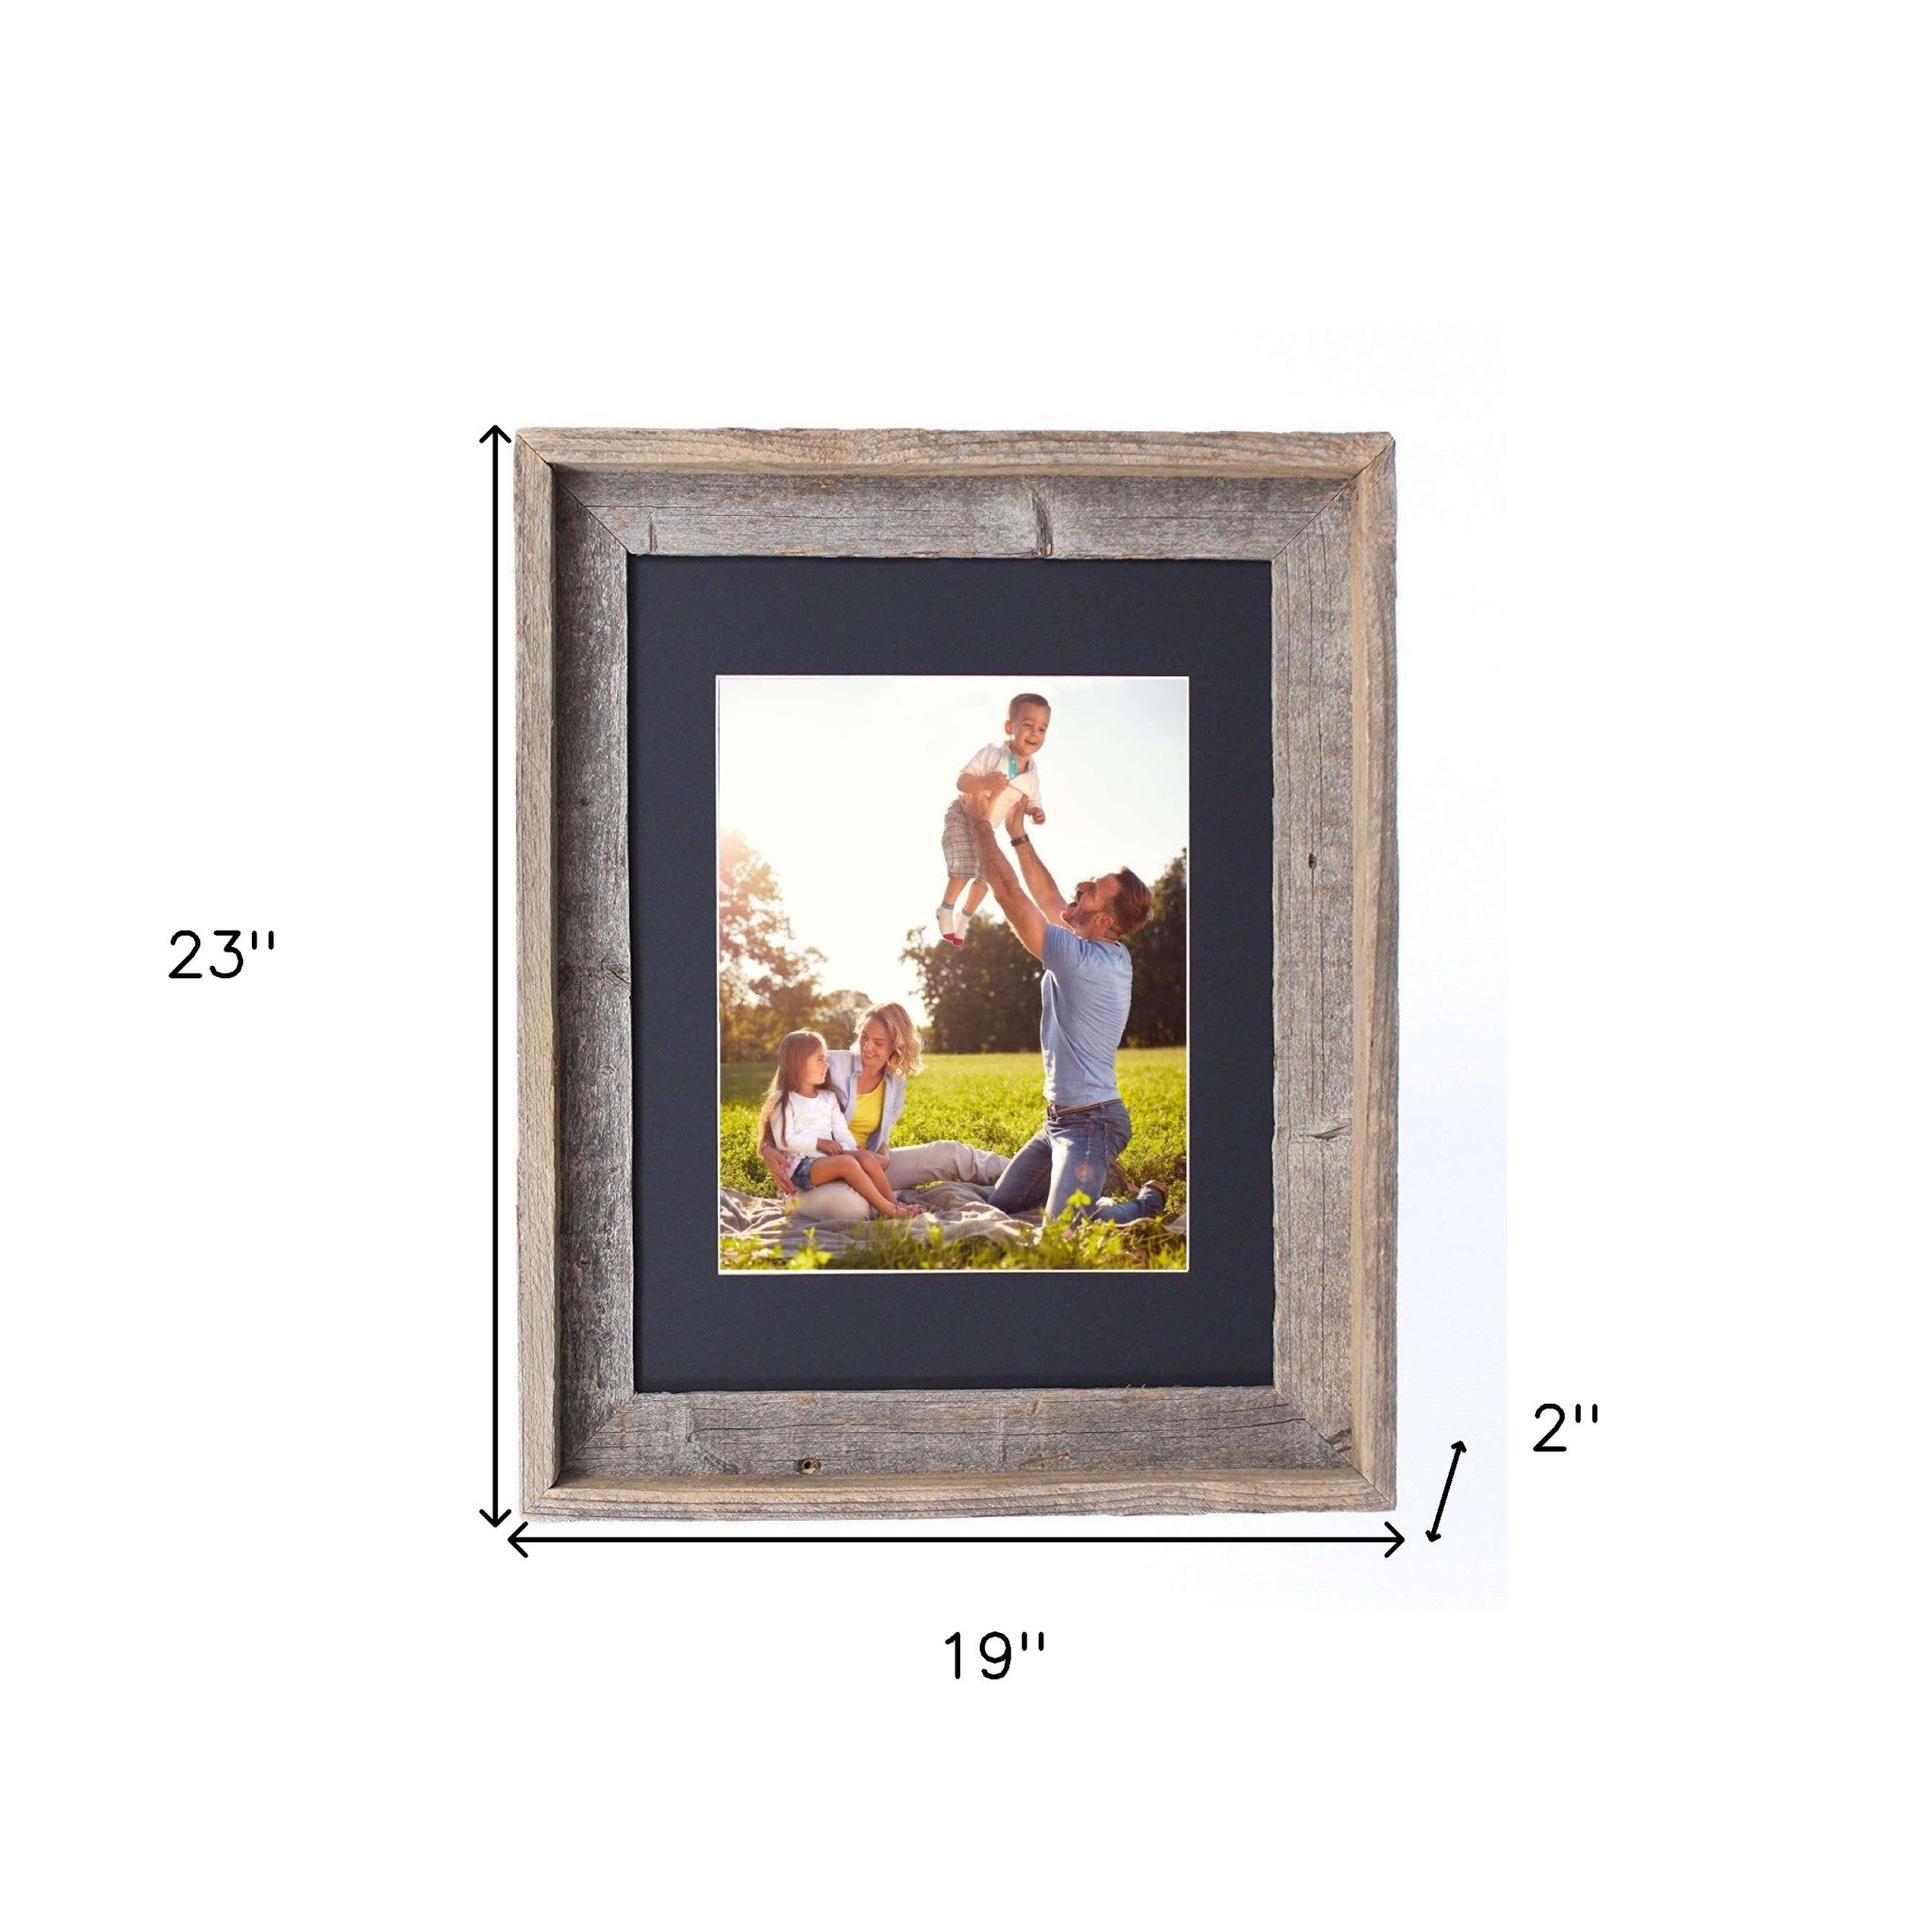 Rustic Black/Grey Wood Picture Frame With Plexiglass Holder | 16